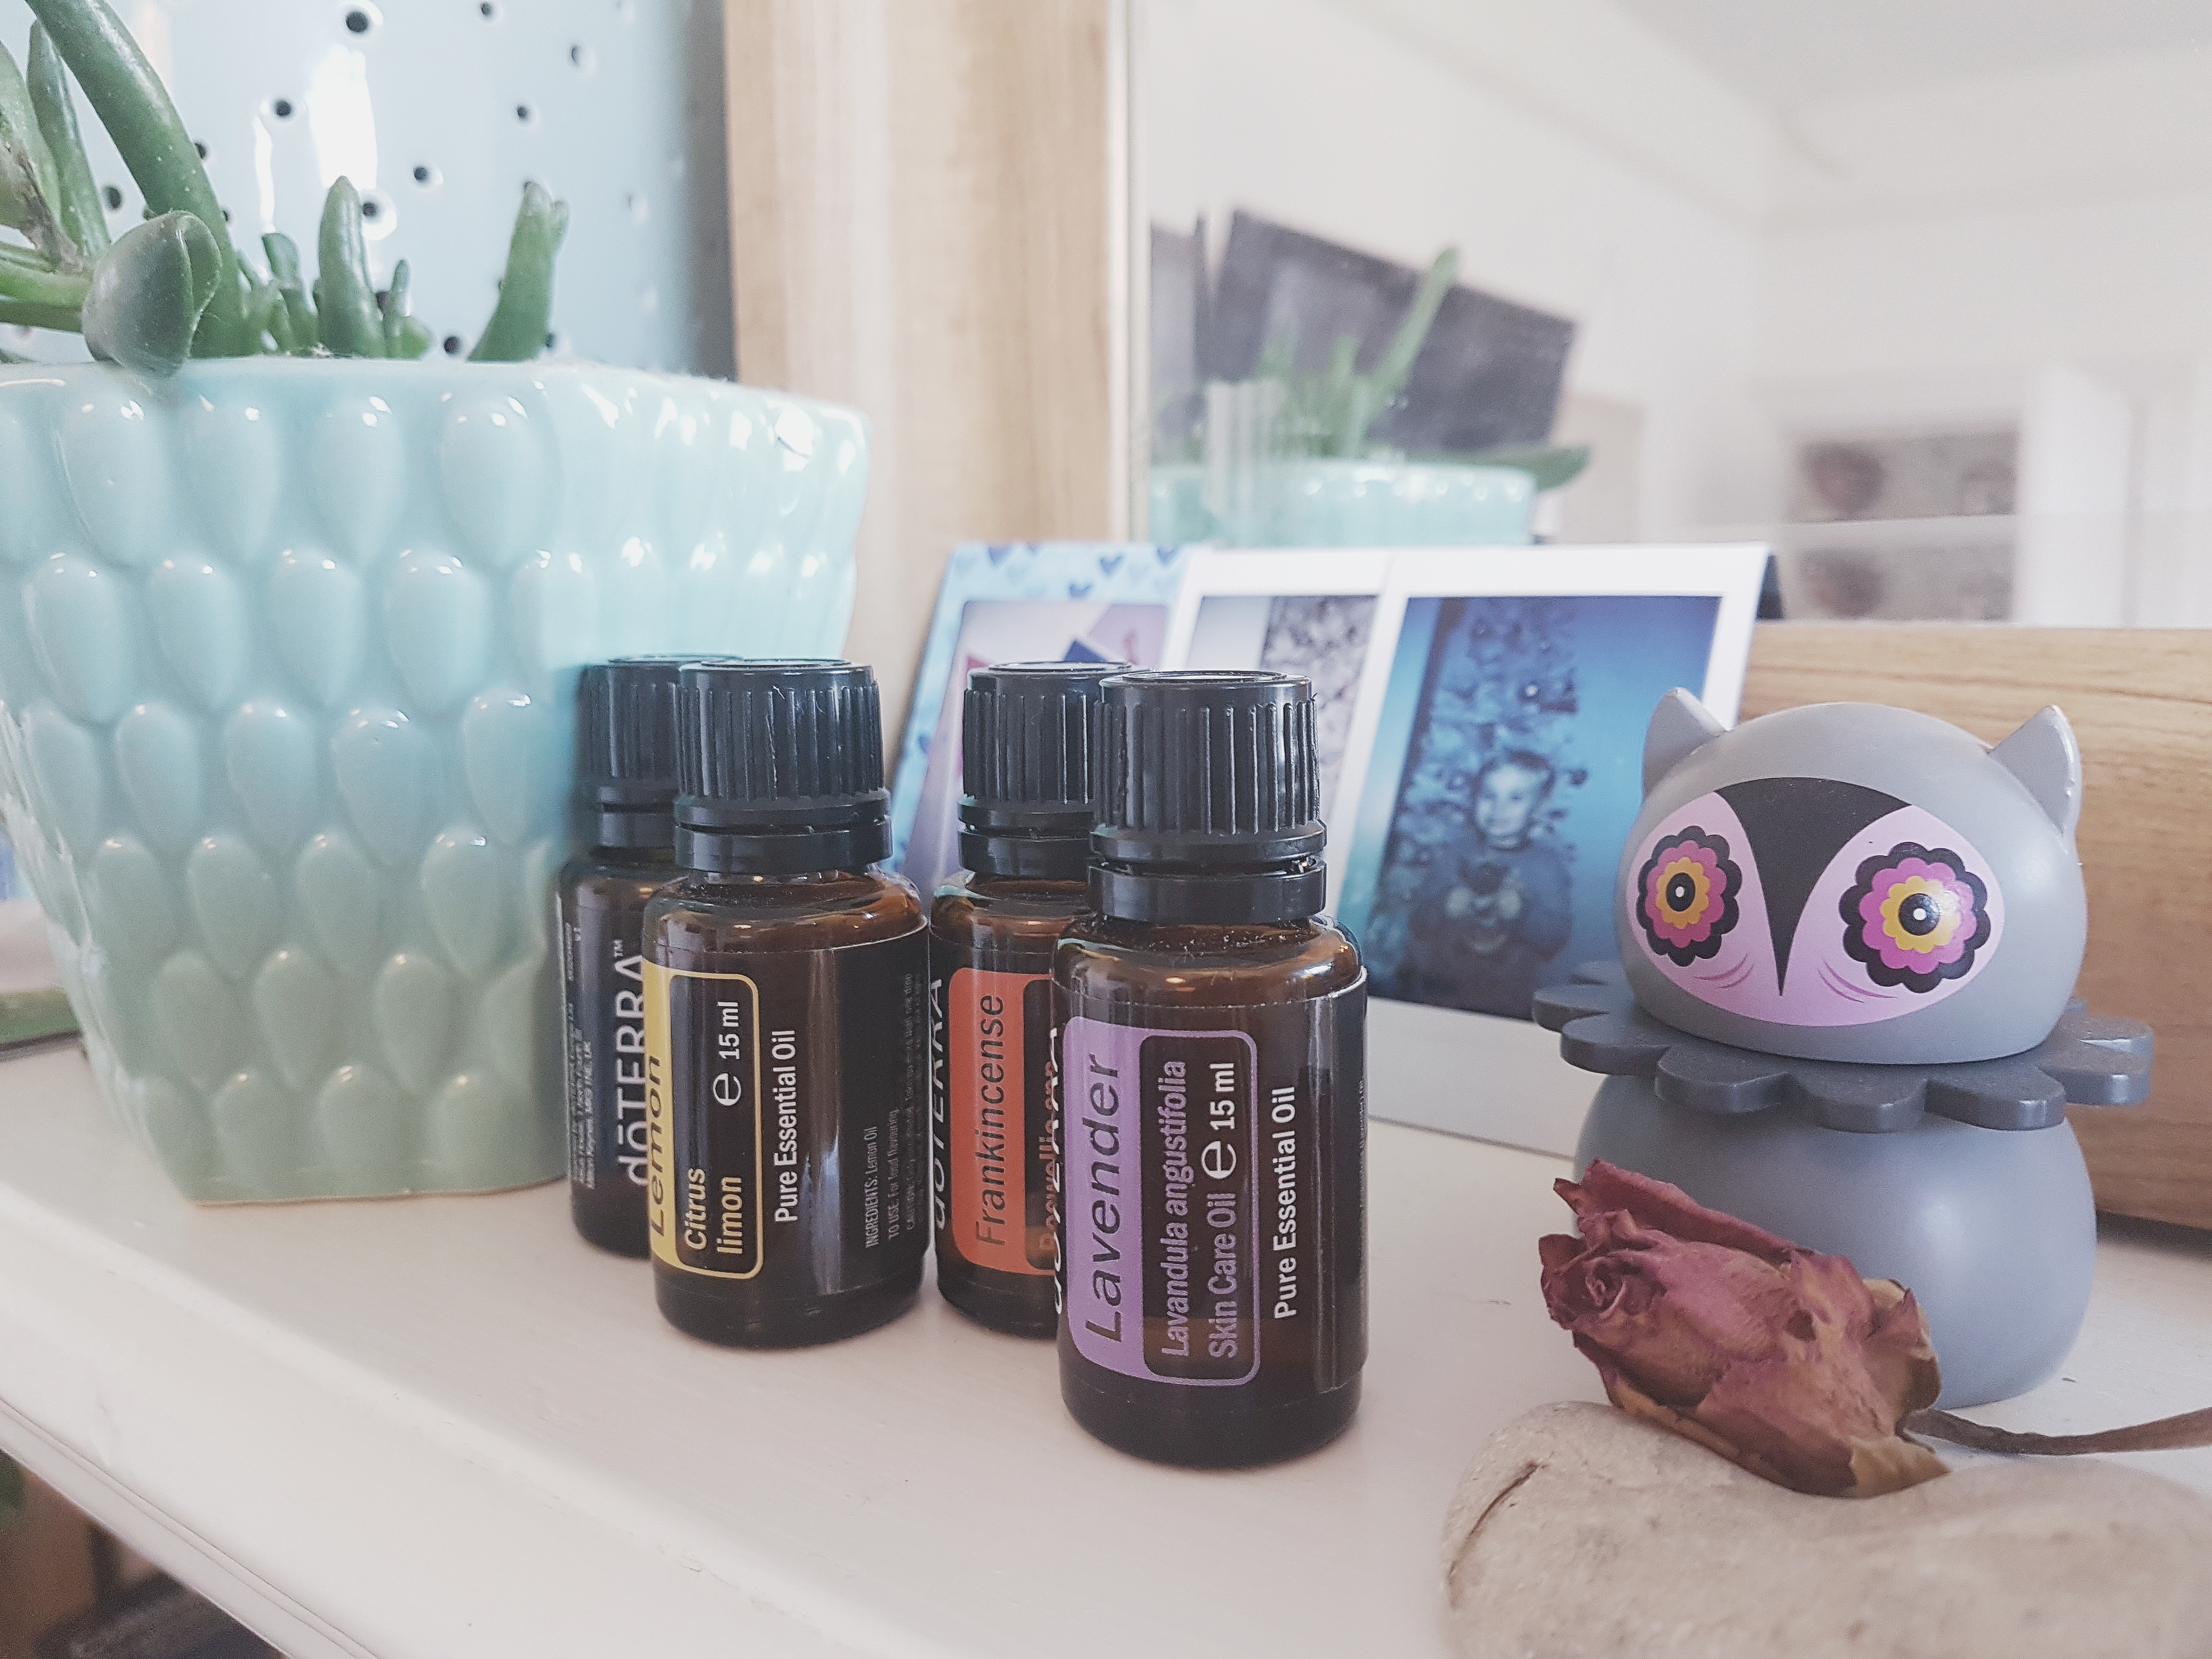 My favourite five Essential Oils I use for my family